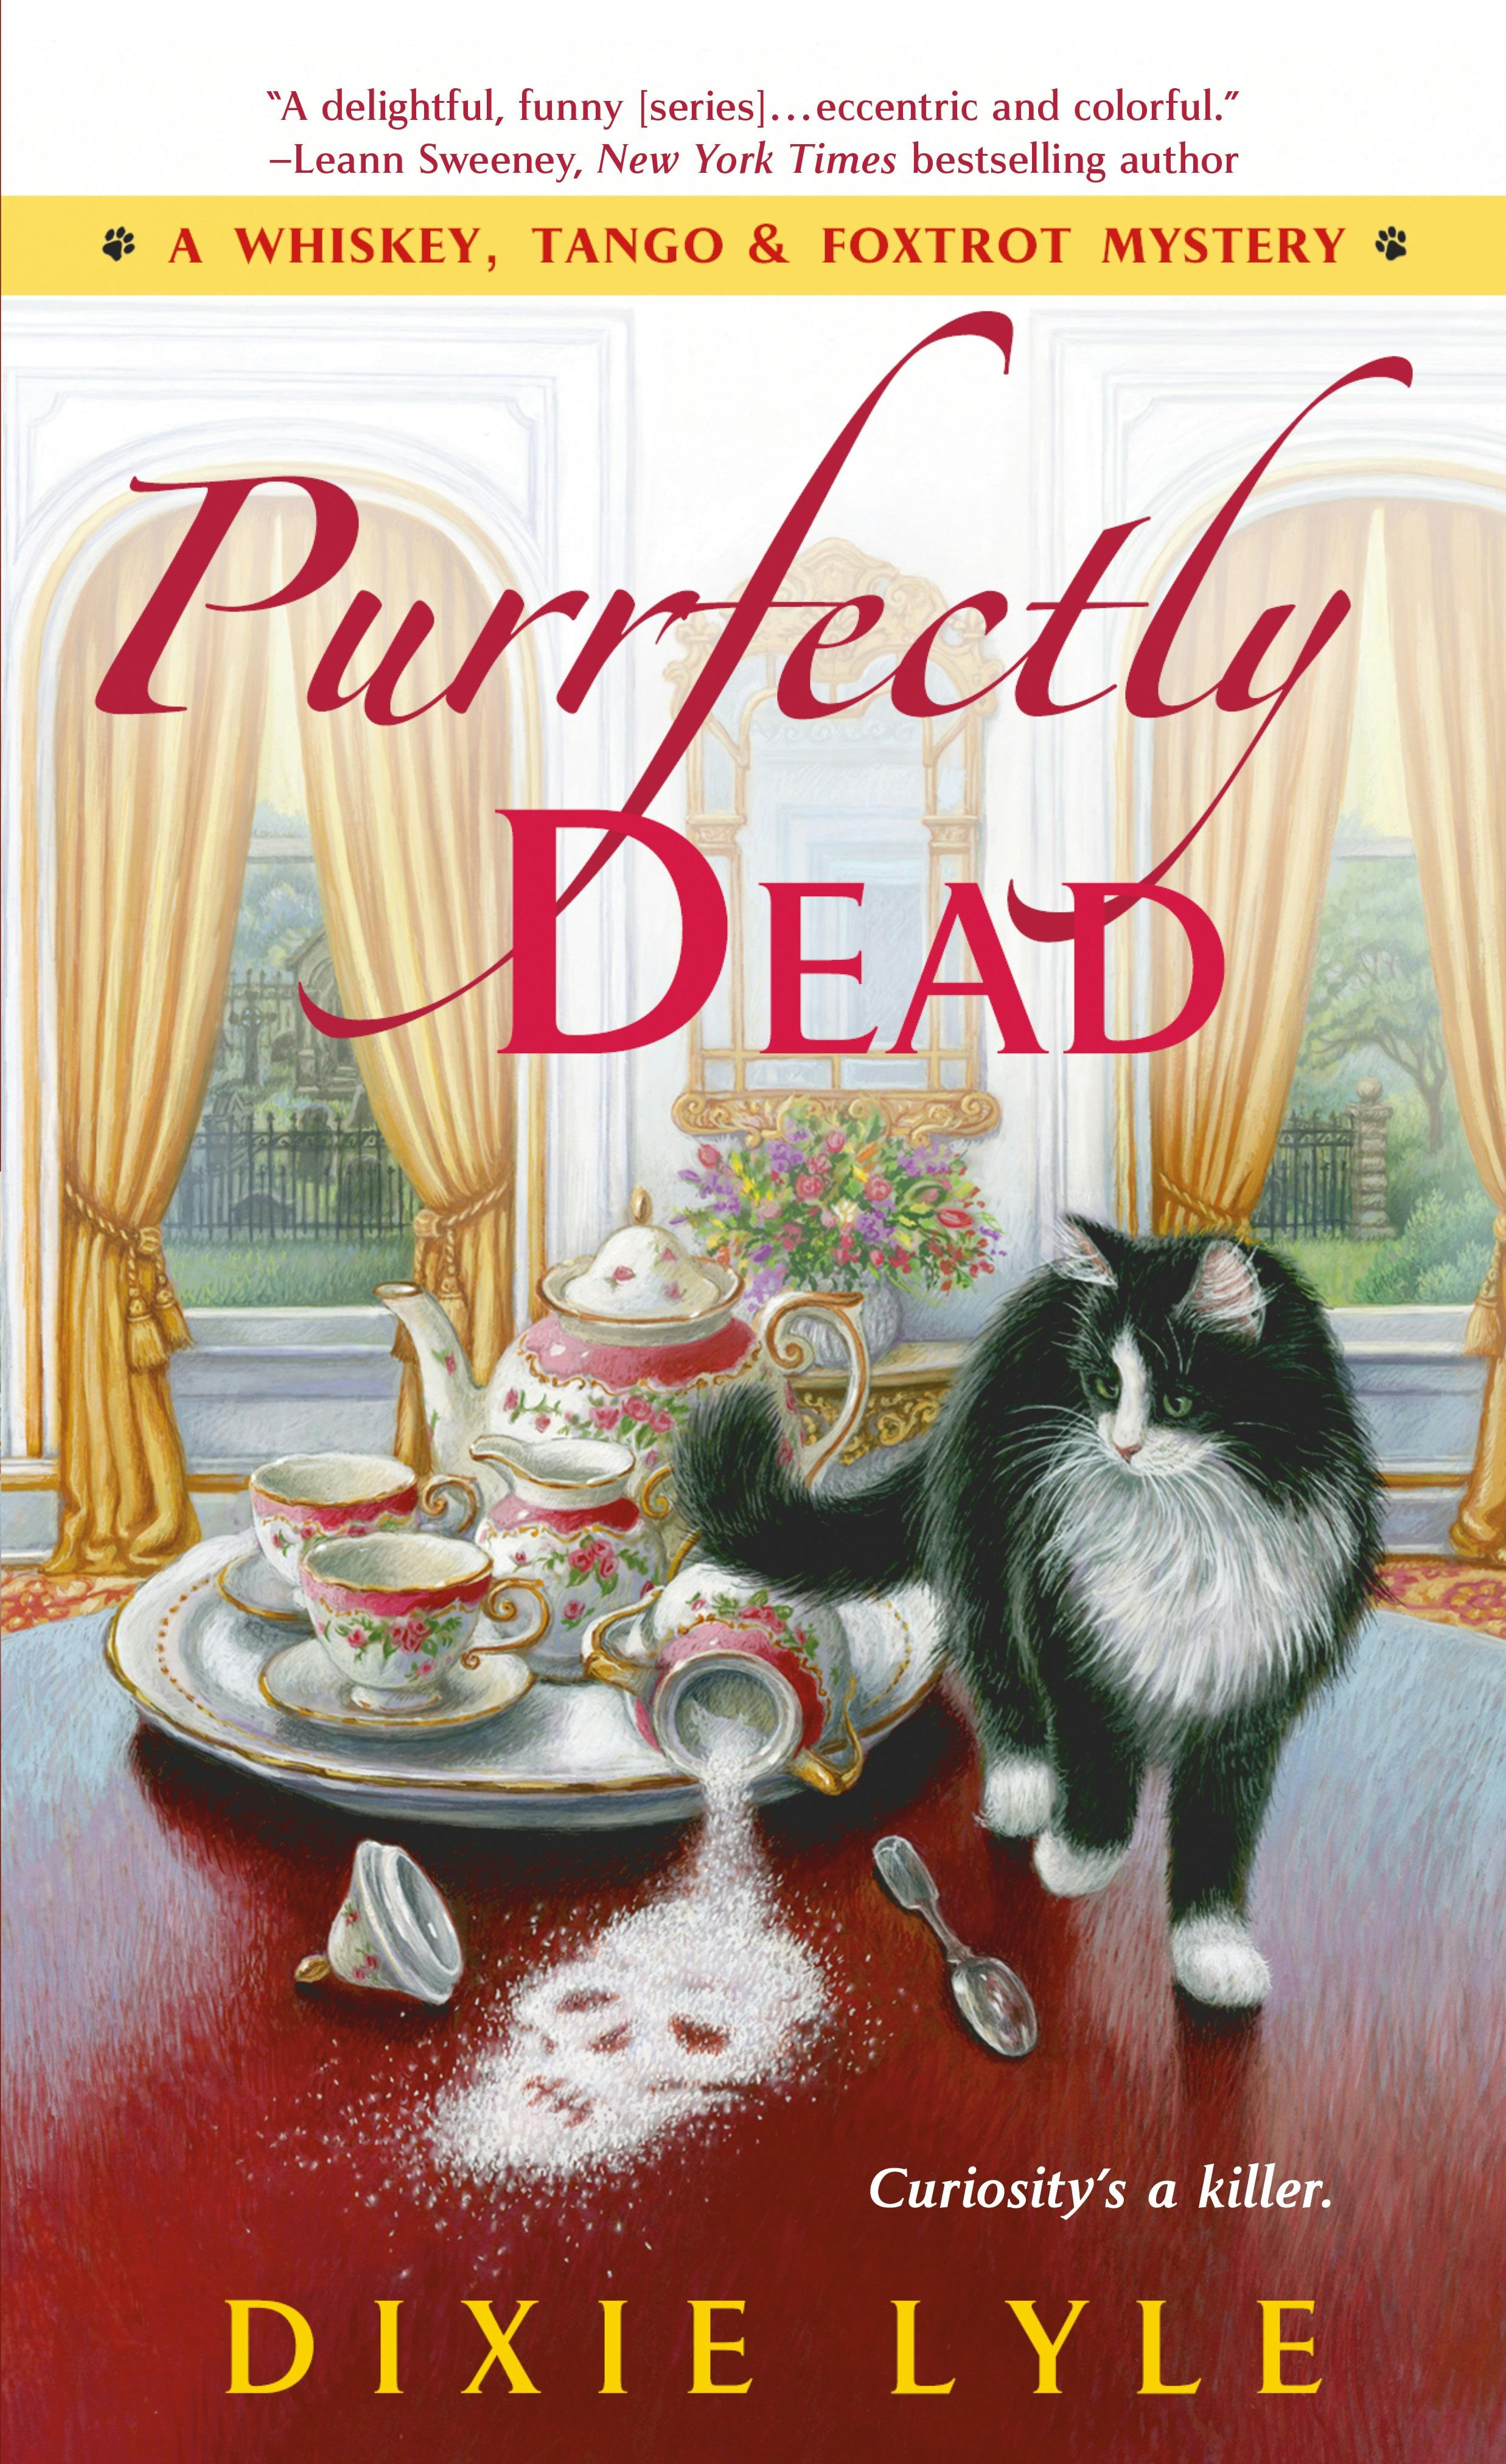 Image of Purrfectly Dead